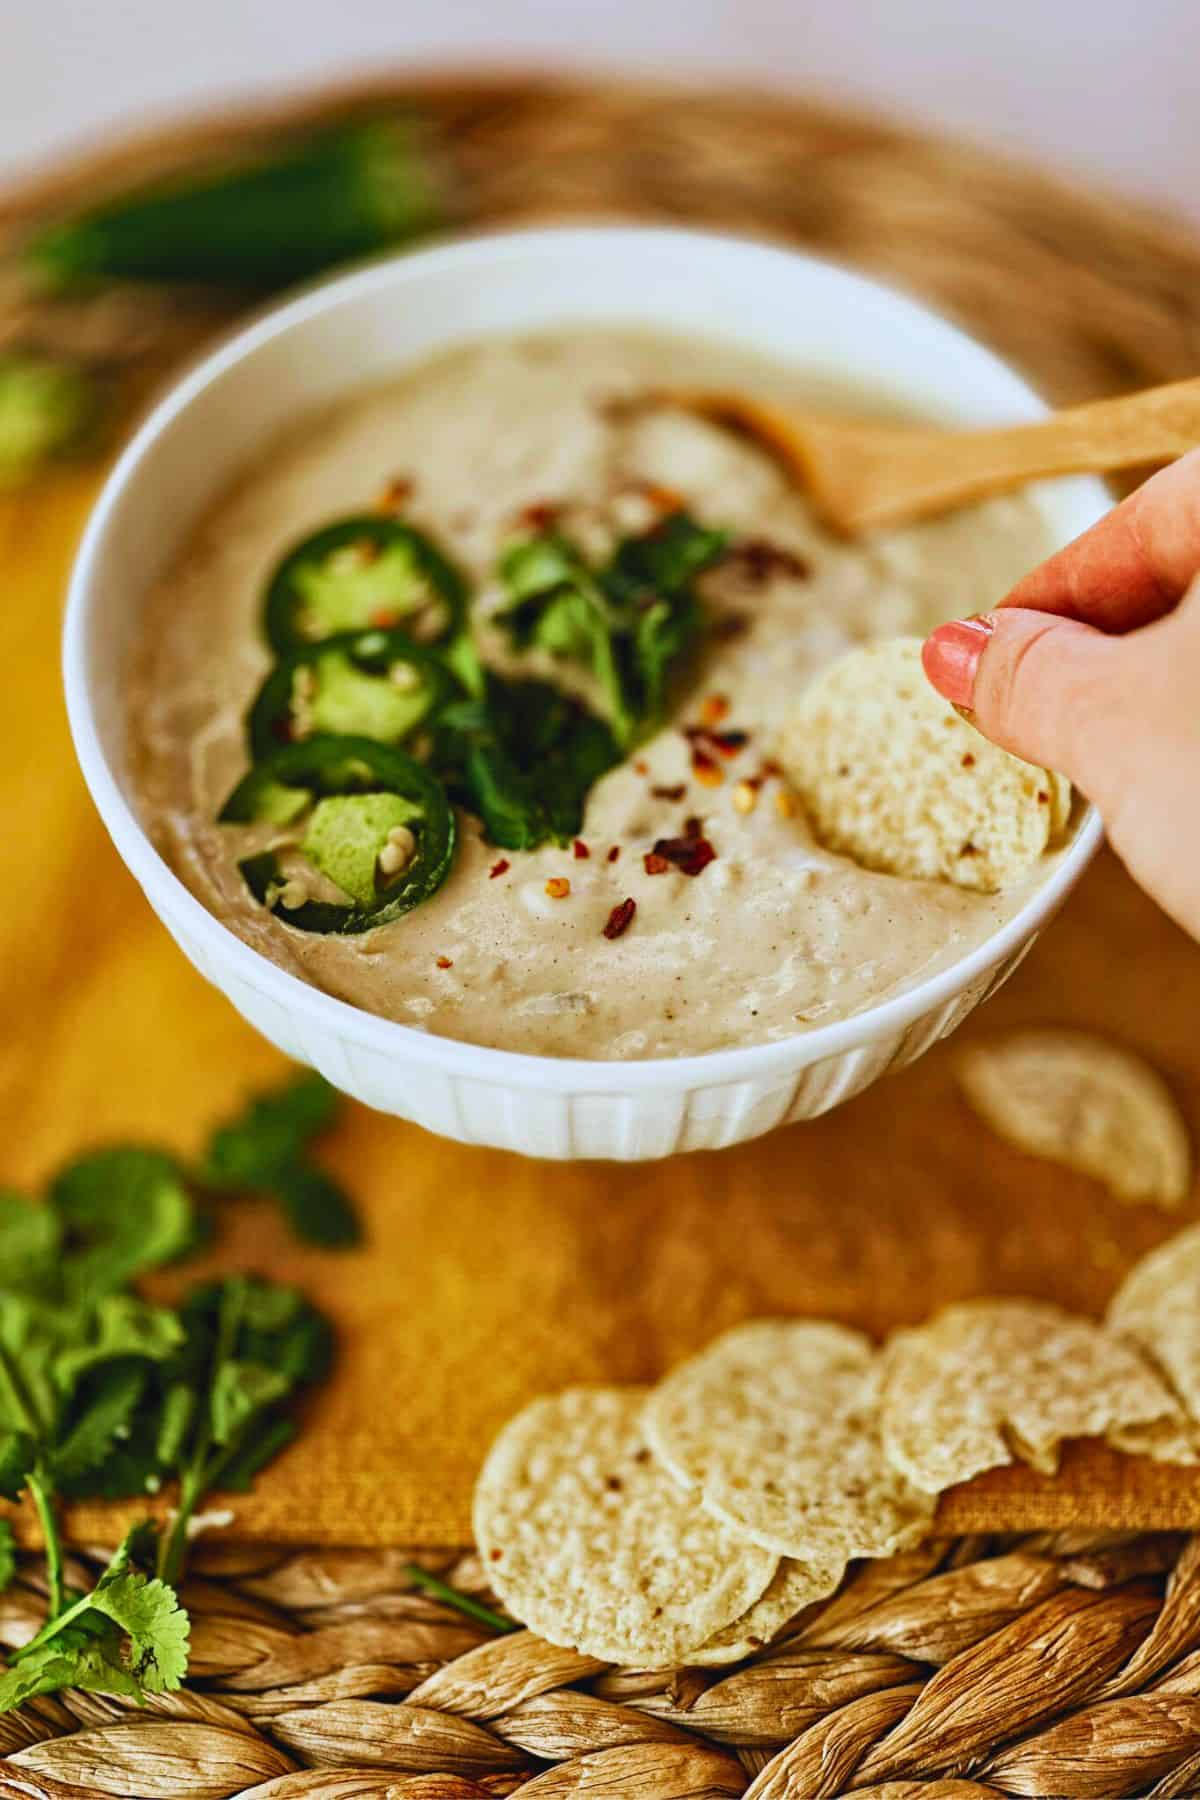 chip dipping into vegan white queso dip (or queso blanco) in a bowl